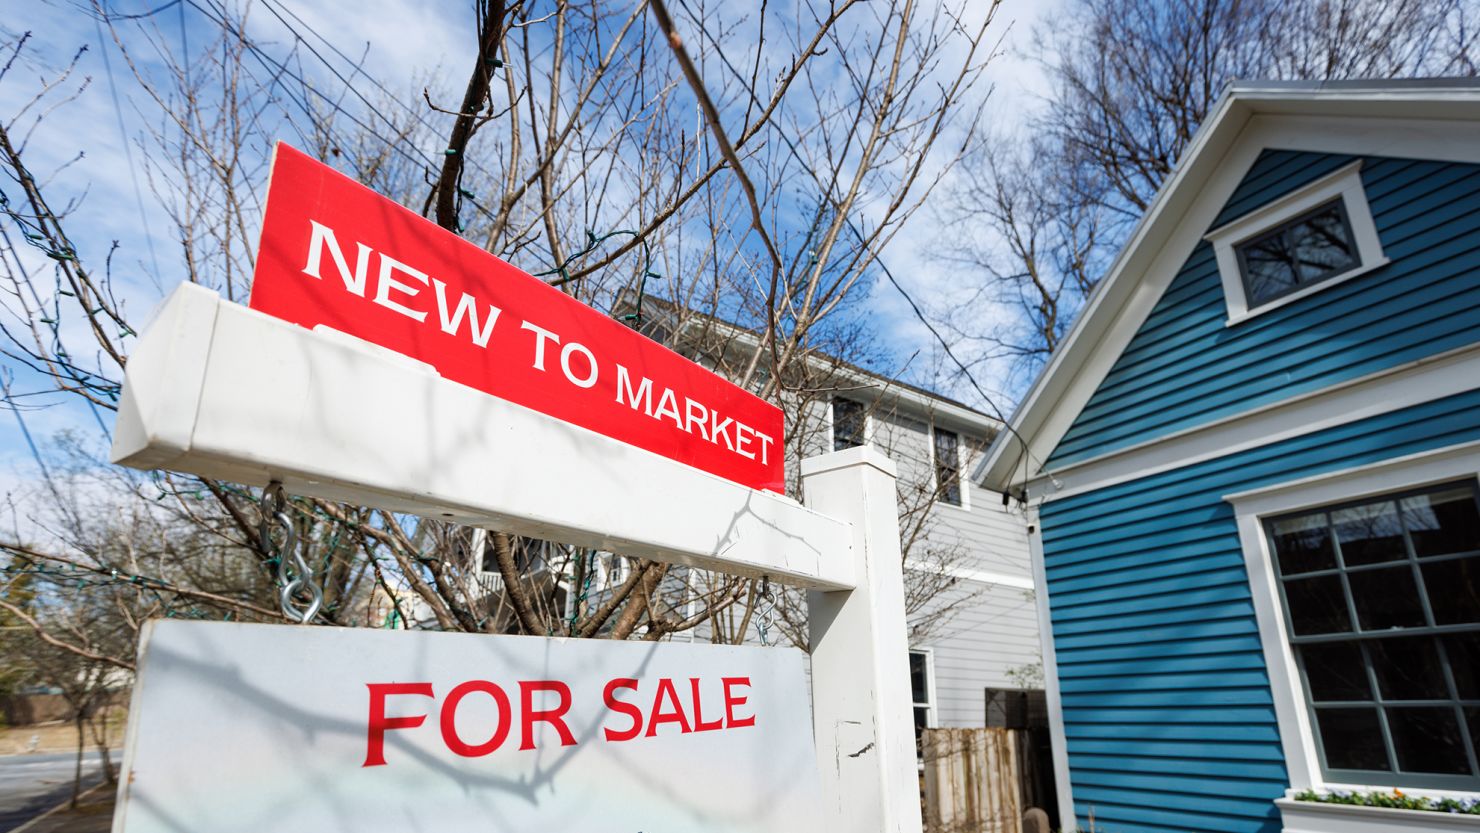 An Affordability Crisis Is Making Some